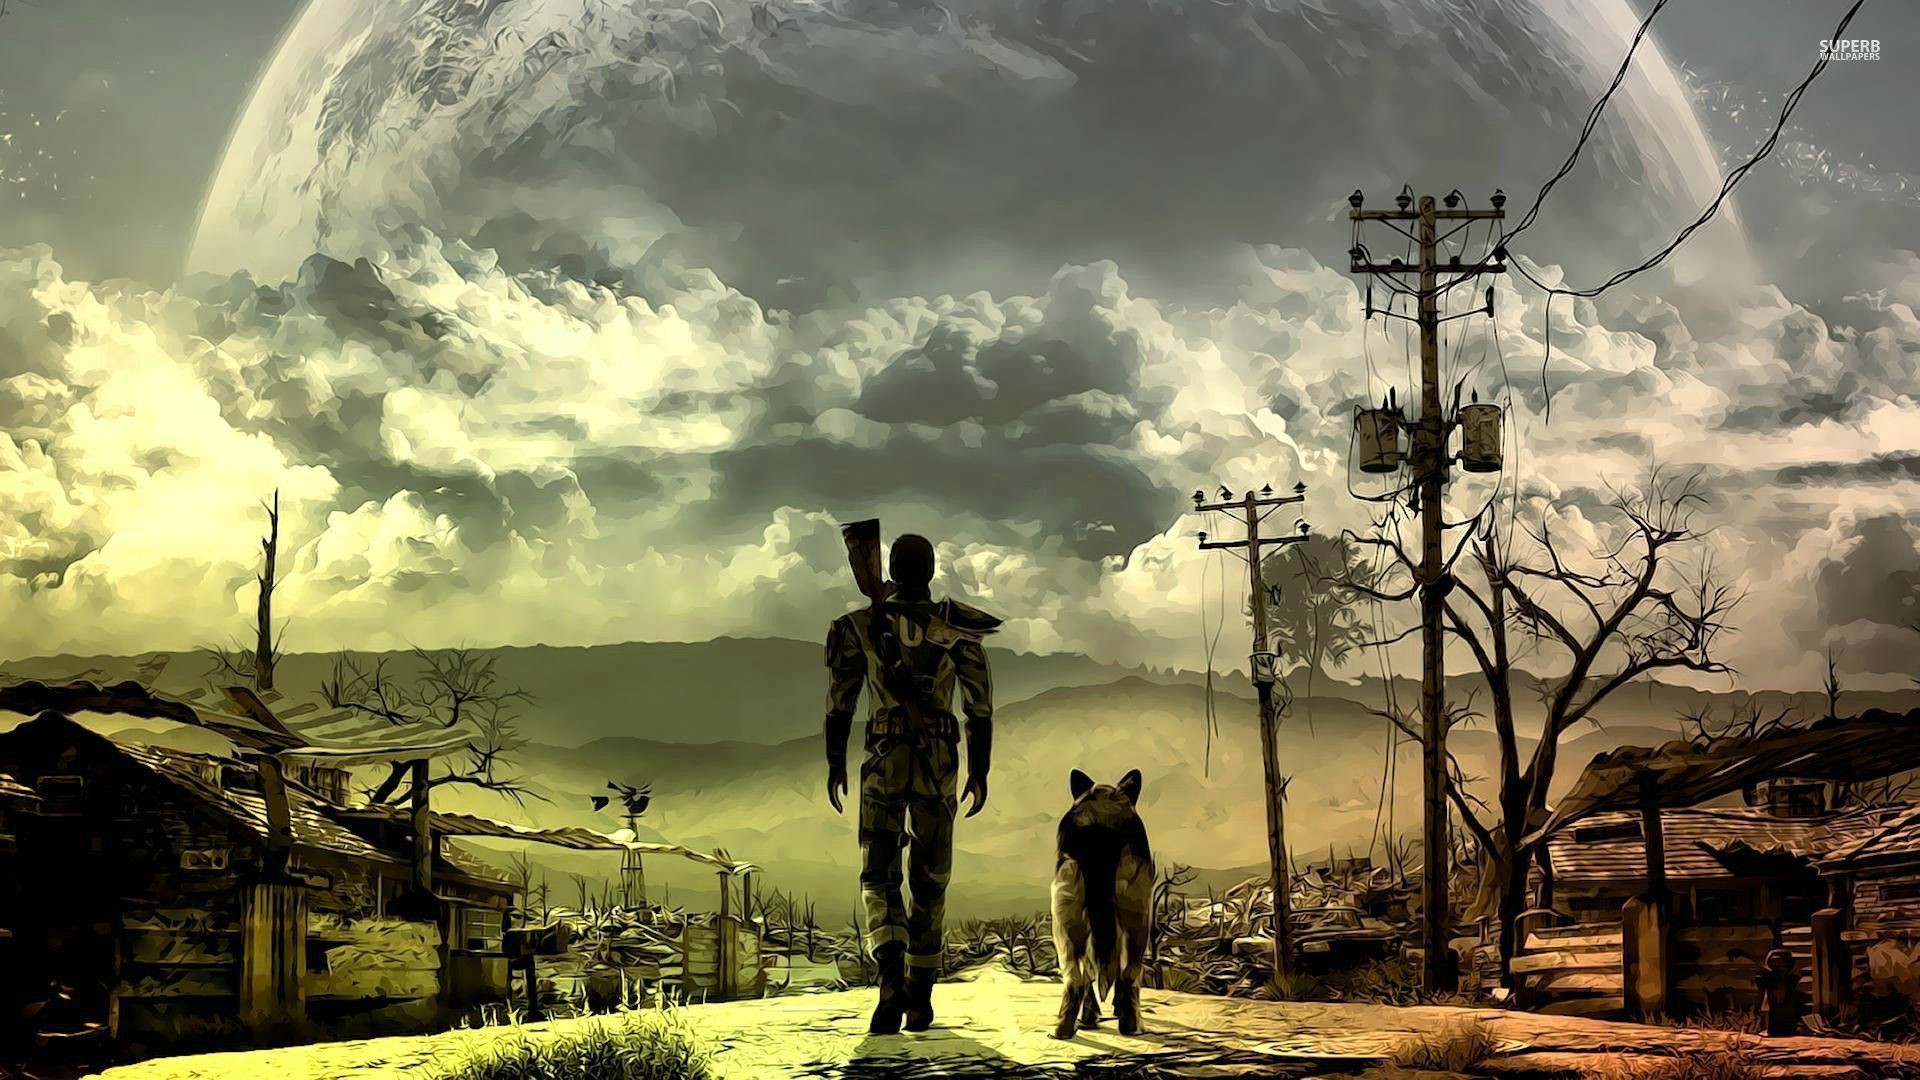 Fallout Wallpapers Wallpaper | HD Wallpapers | Pinterest | Fallout and  Wallpaper